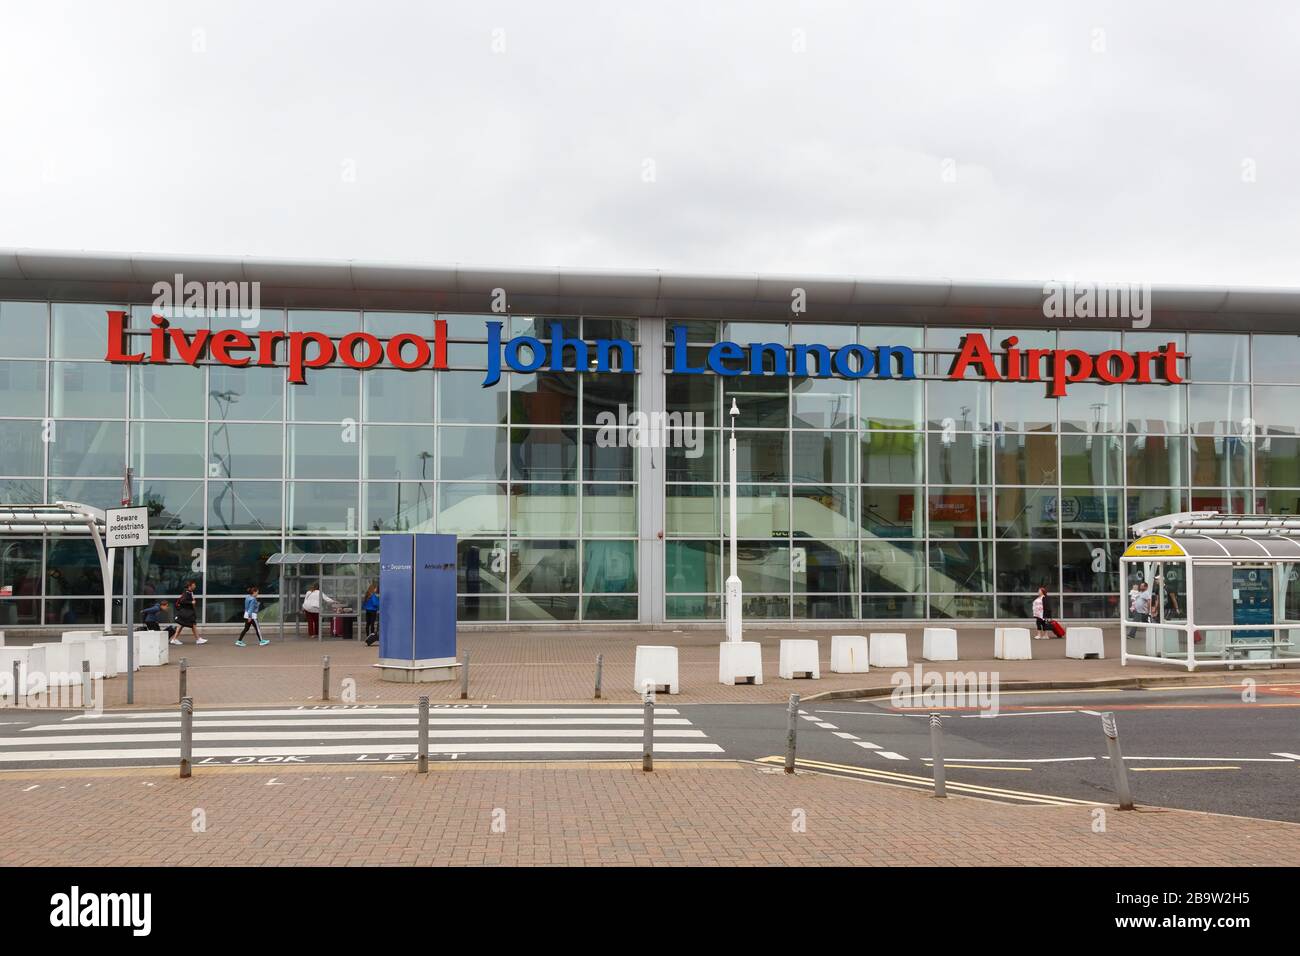 Liverpool, United Kingdom – August 14, 2017: Terminal of Liverpool John Lennon Airport (LPL) in the United Kingdom. Stock Photo